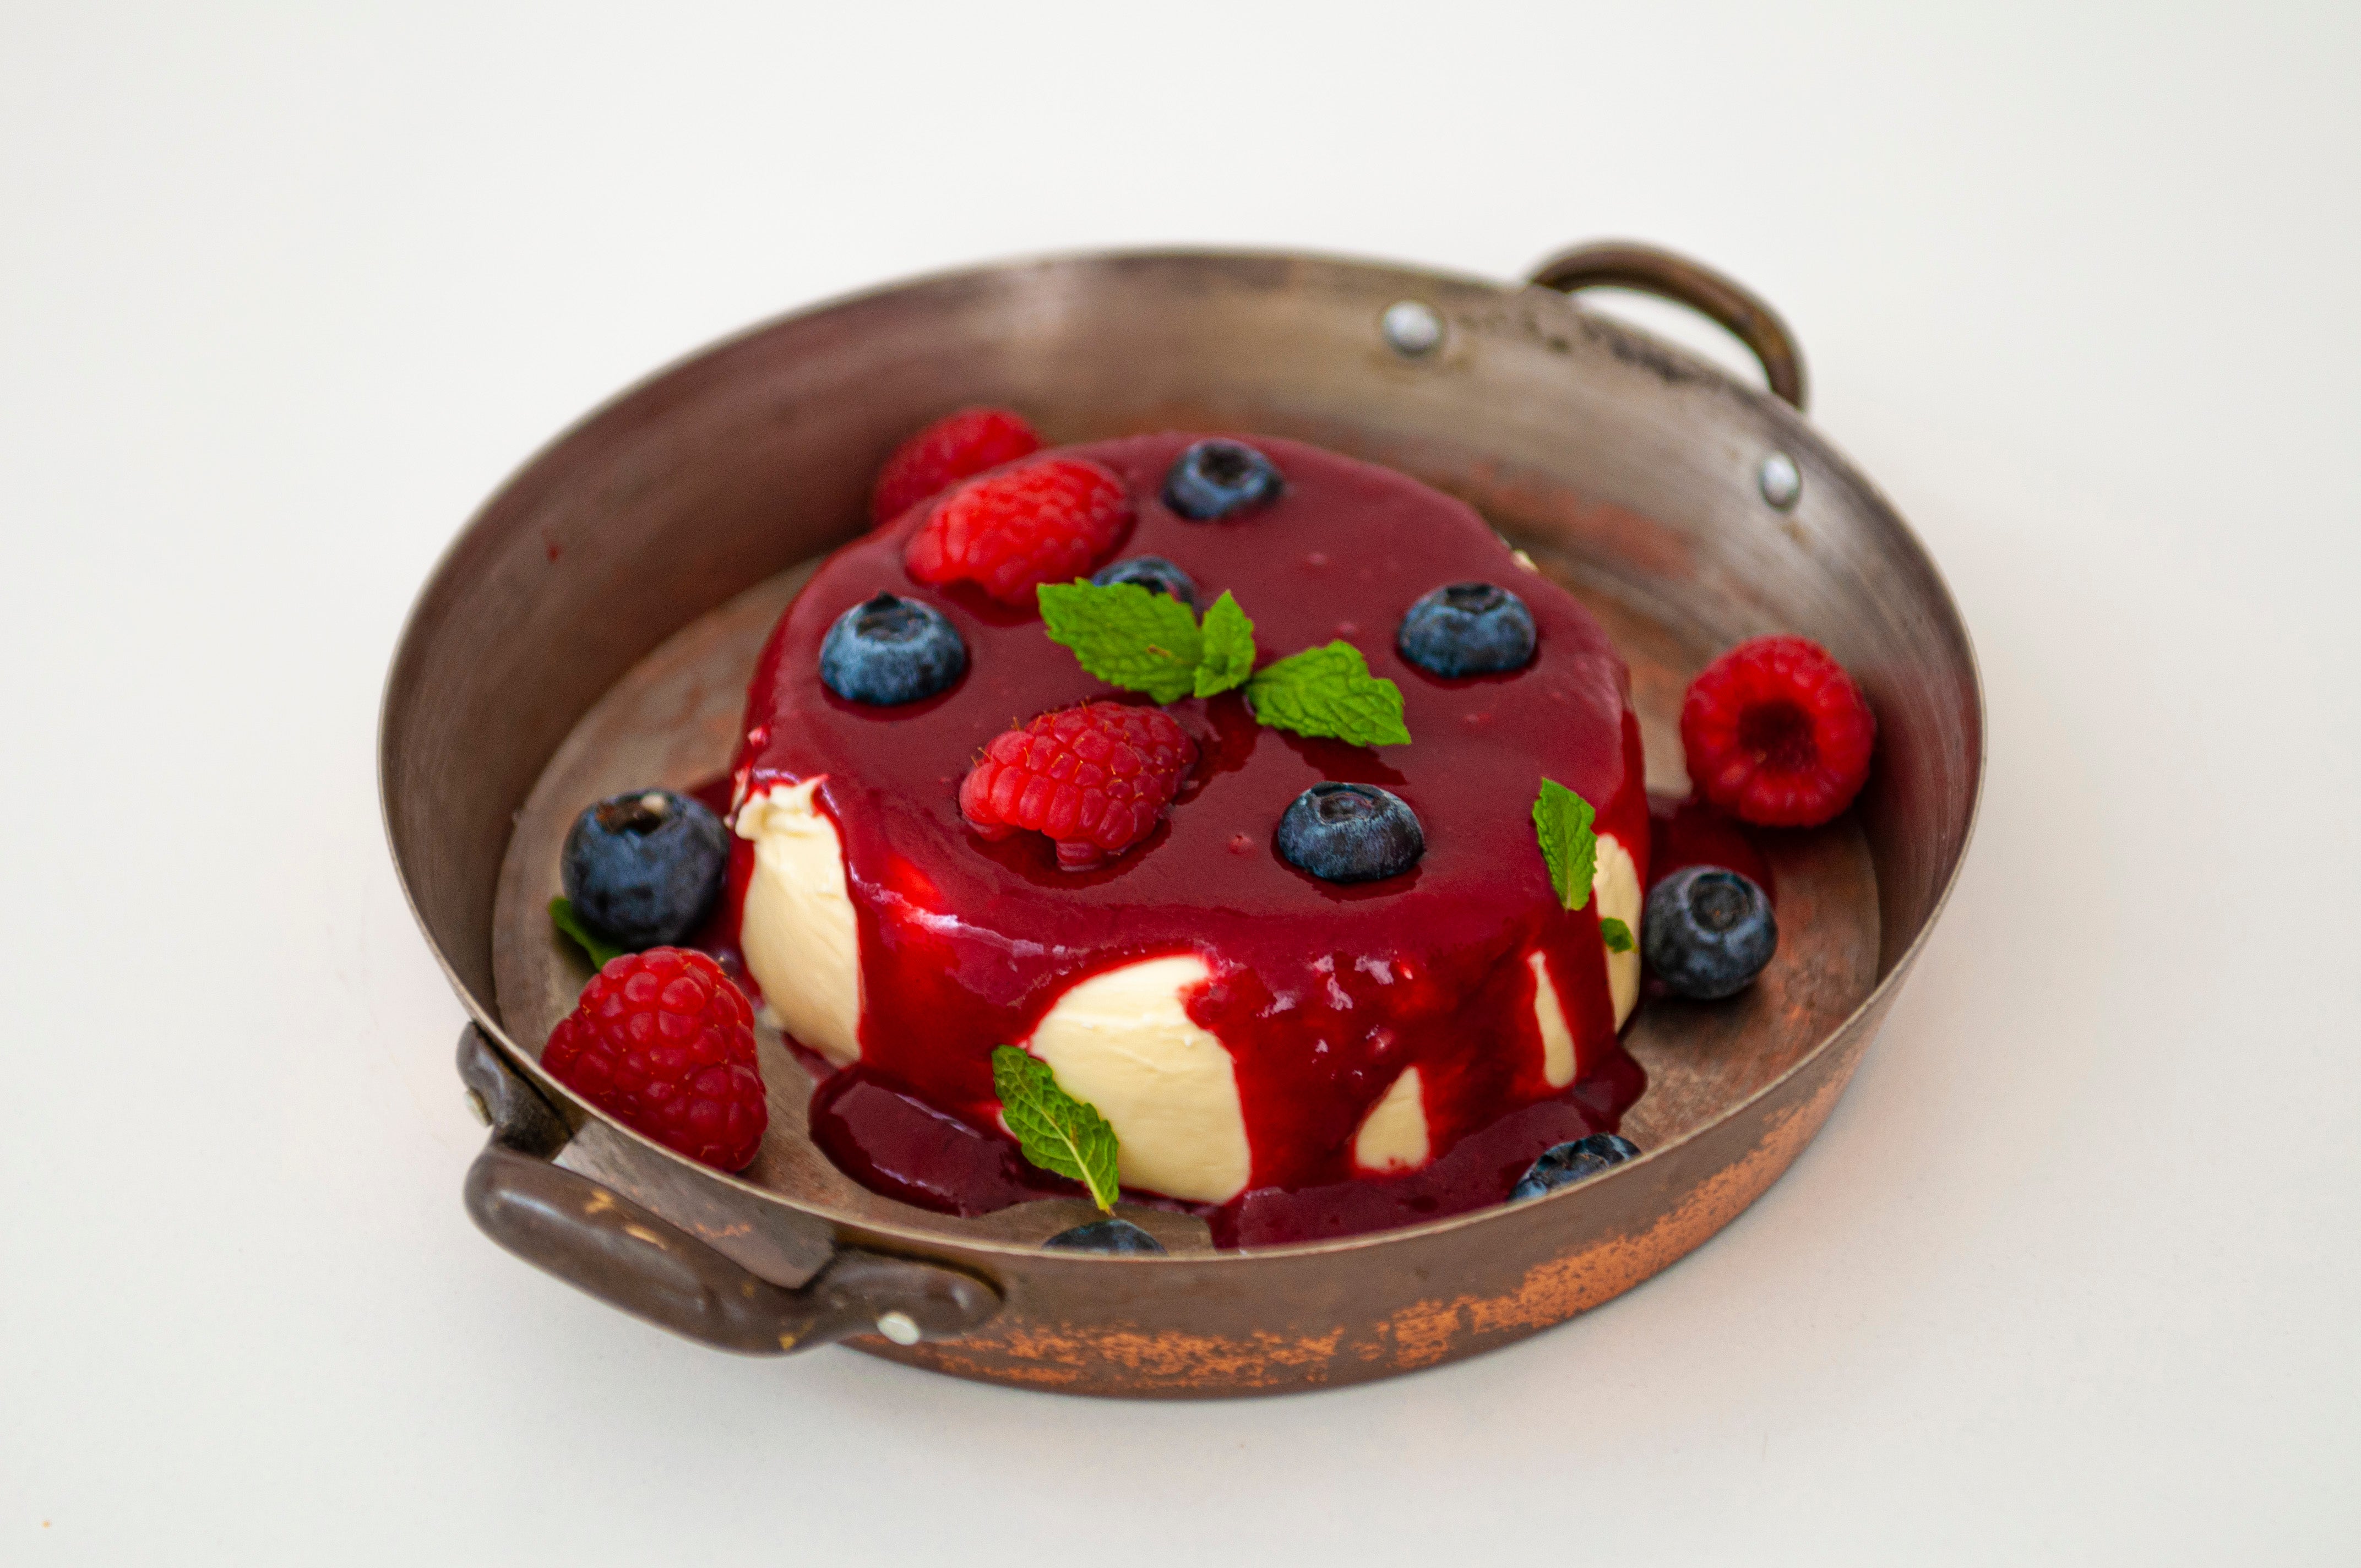 Panna cotta with red fruit